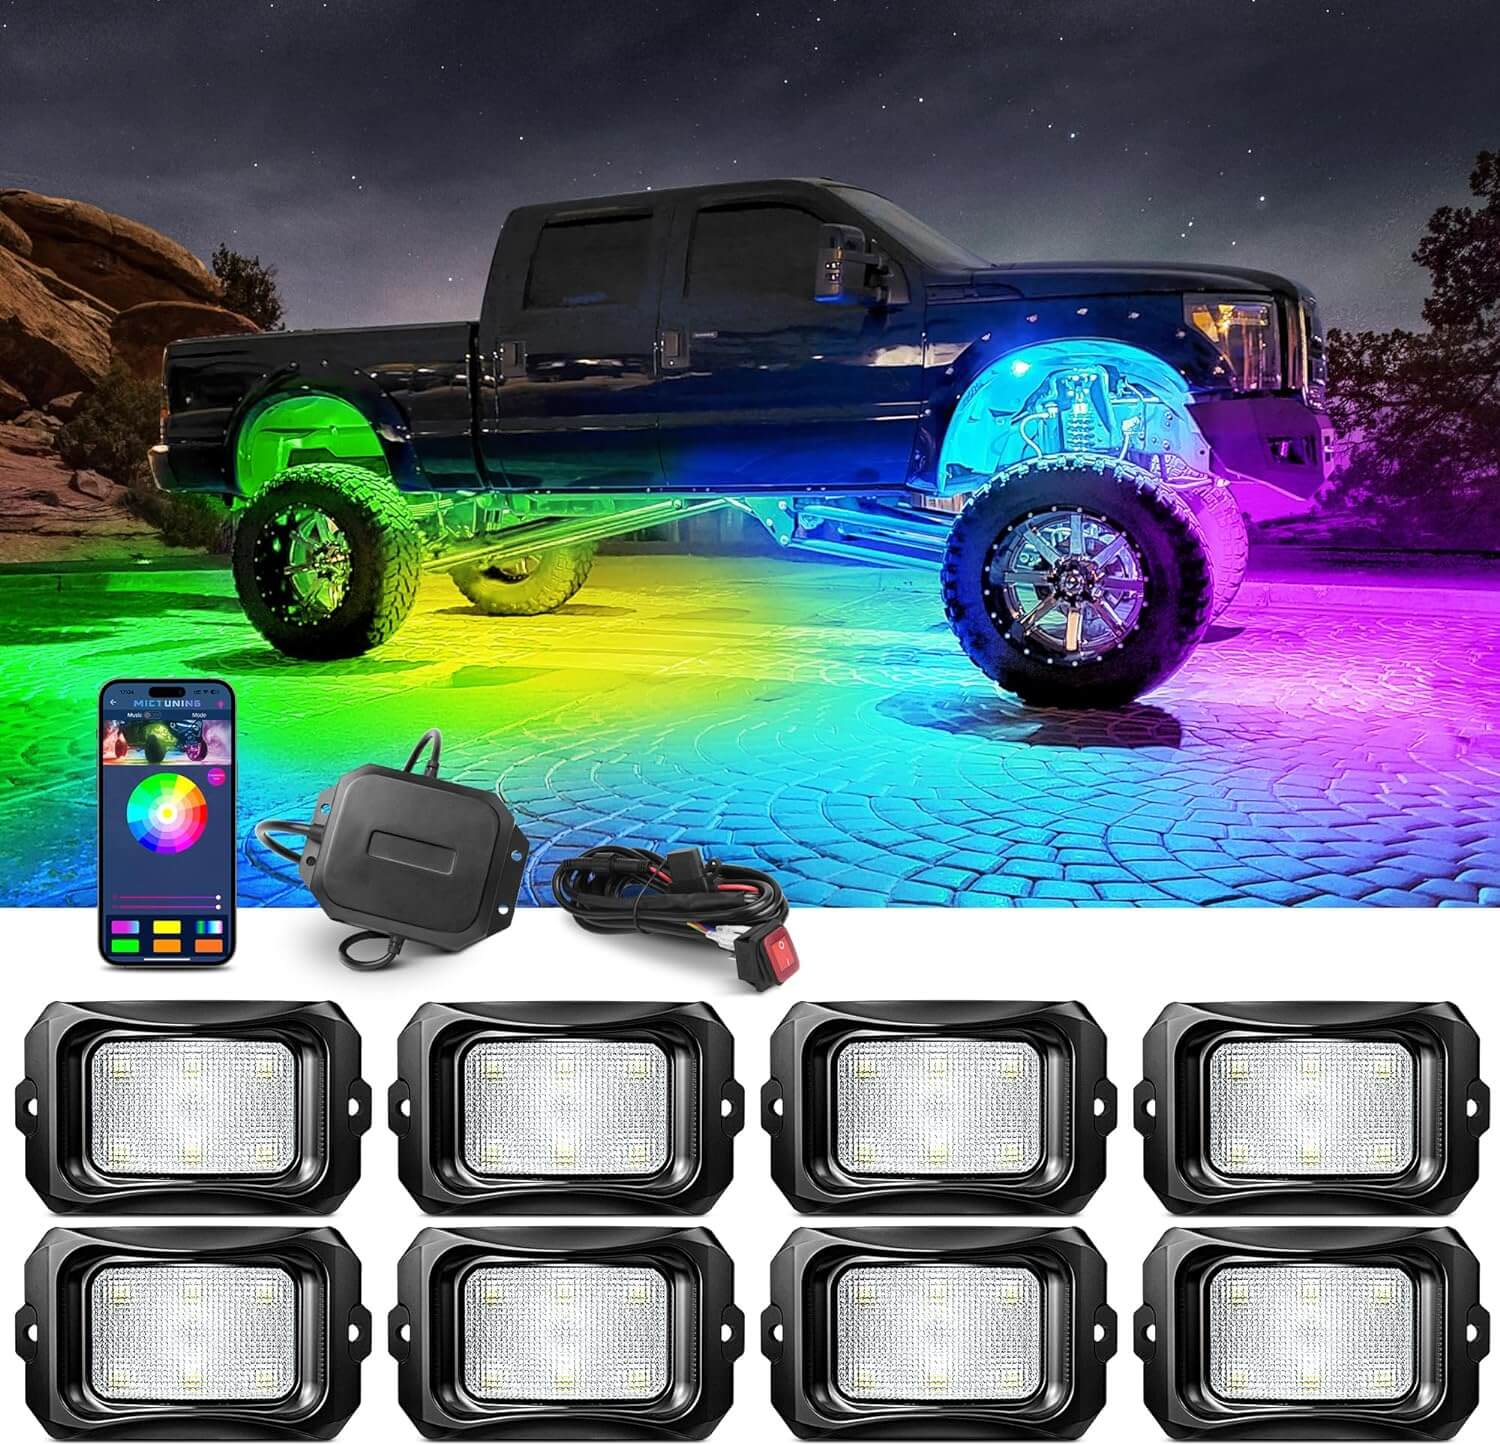 Three-Piece RGB+IC Collection, C2 RGB+IC Rock Lights 8 Pods, 4ft W1 Whip Lights Kit with 15.5″ Chasing Color Wheel Ring Lights